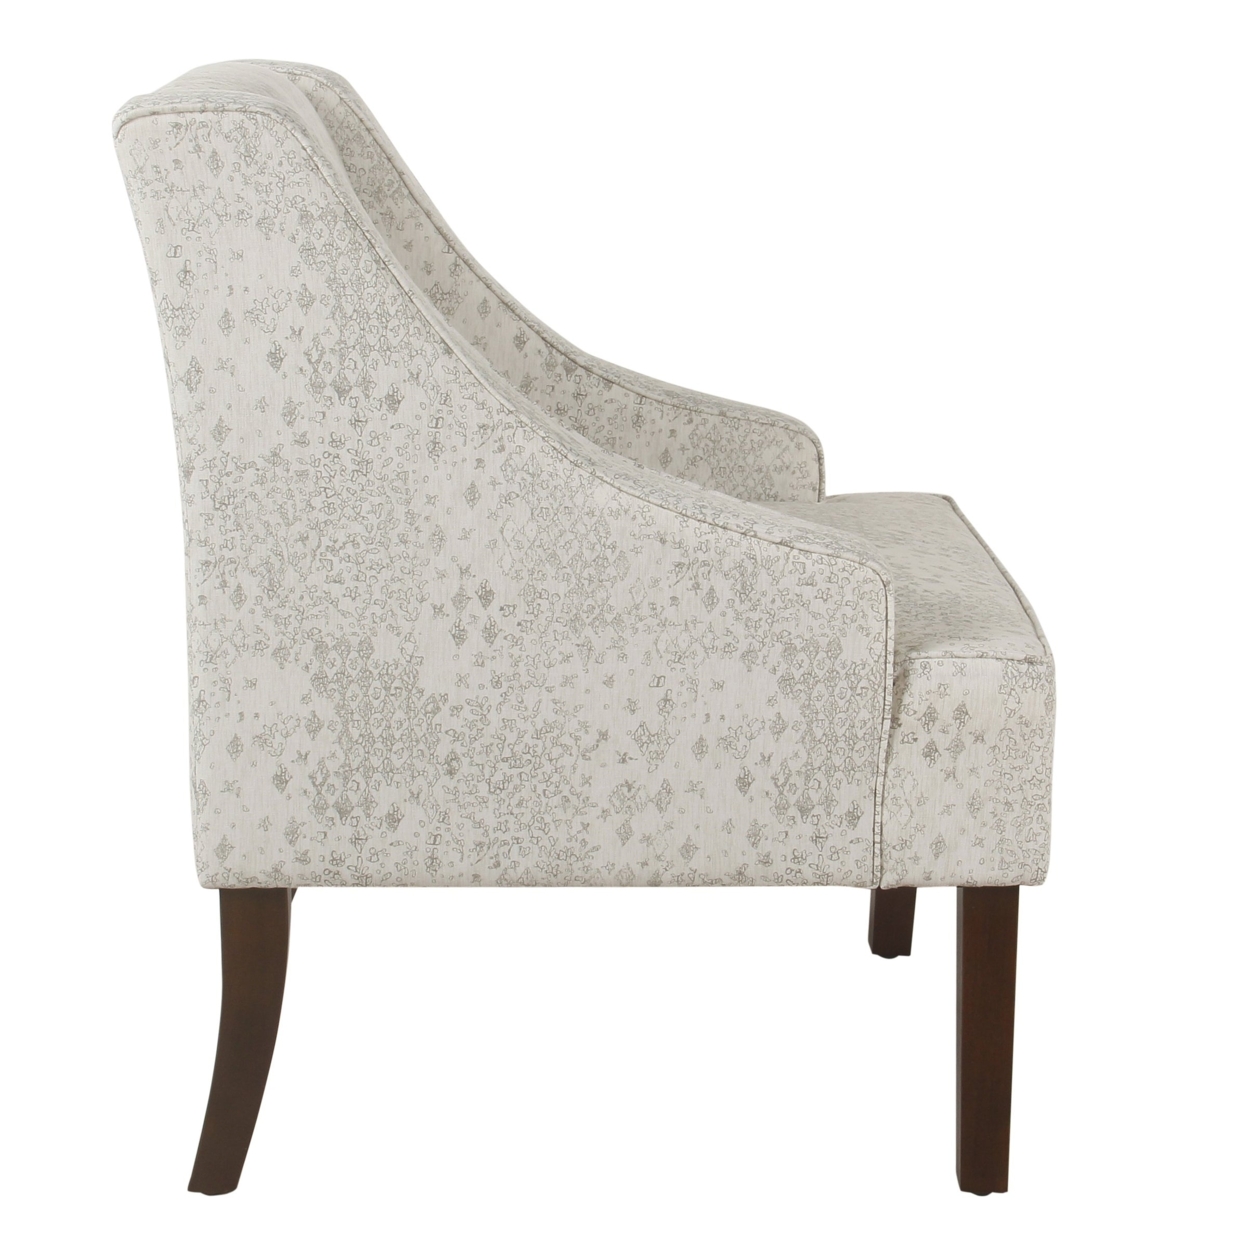 25 Inch Accent Chair, Patterned Gray Fabric Upholstery With Swooping Arms